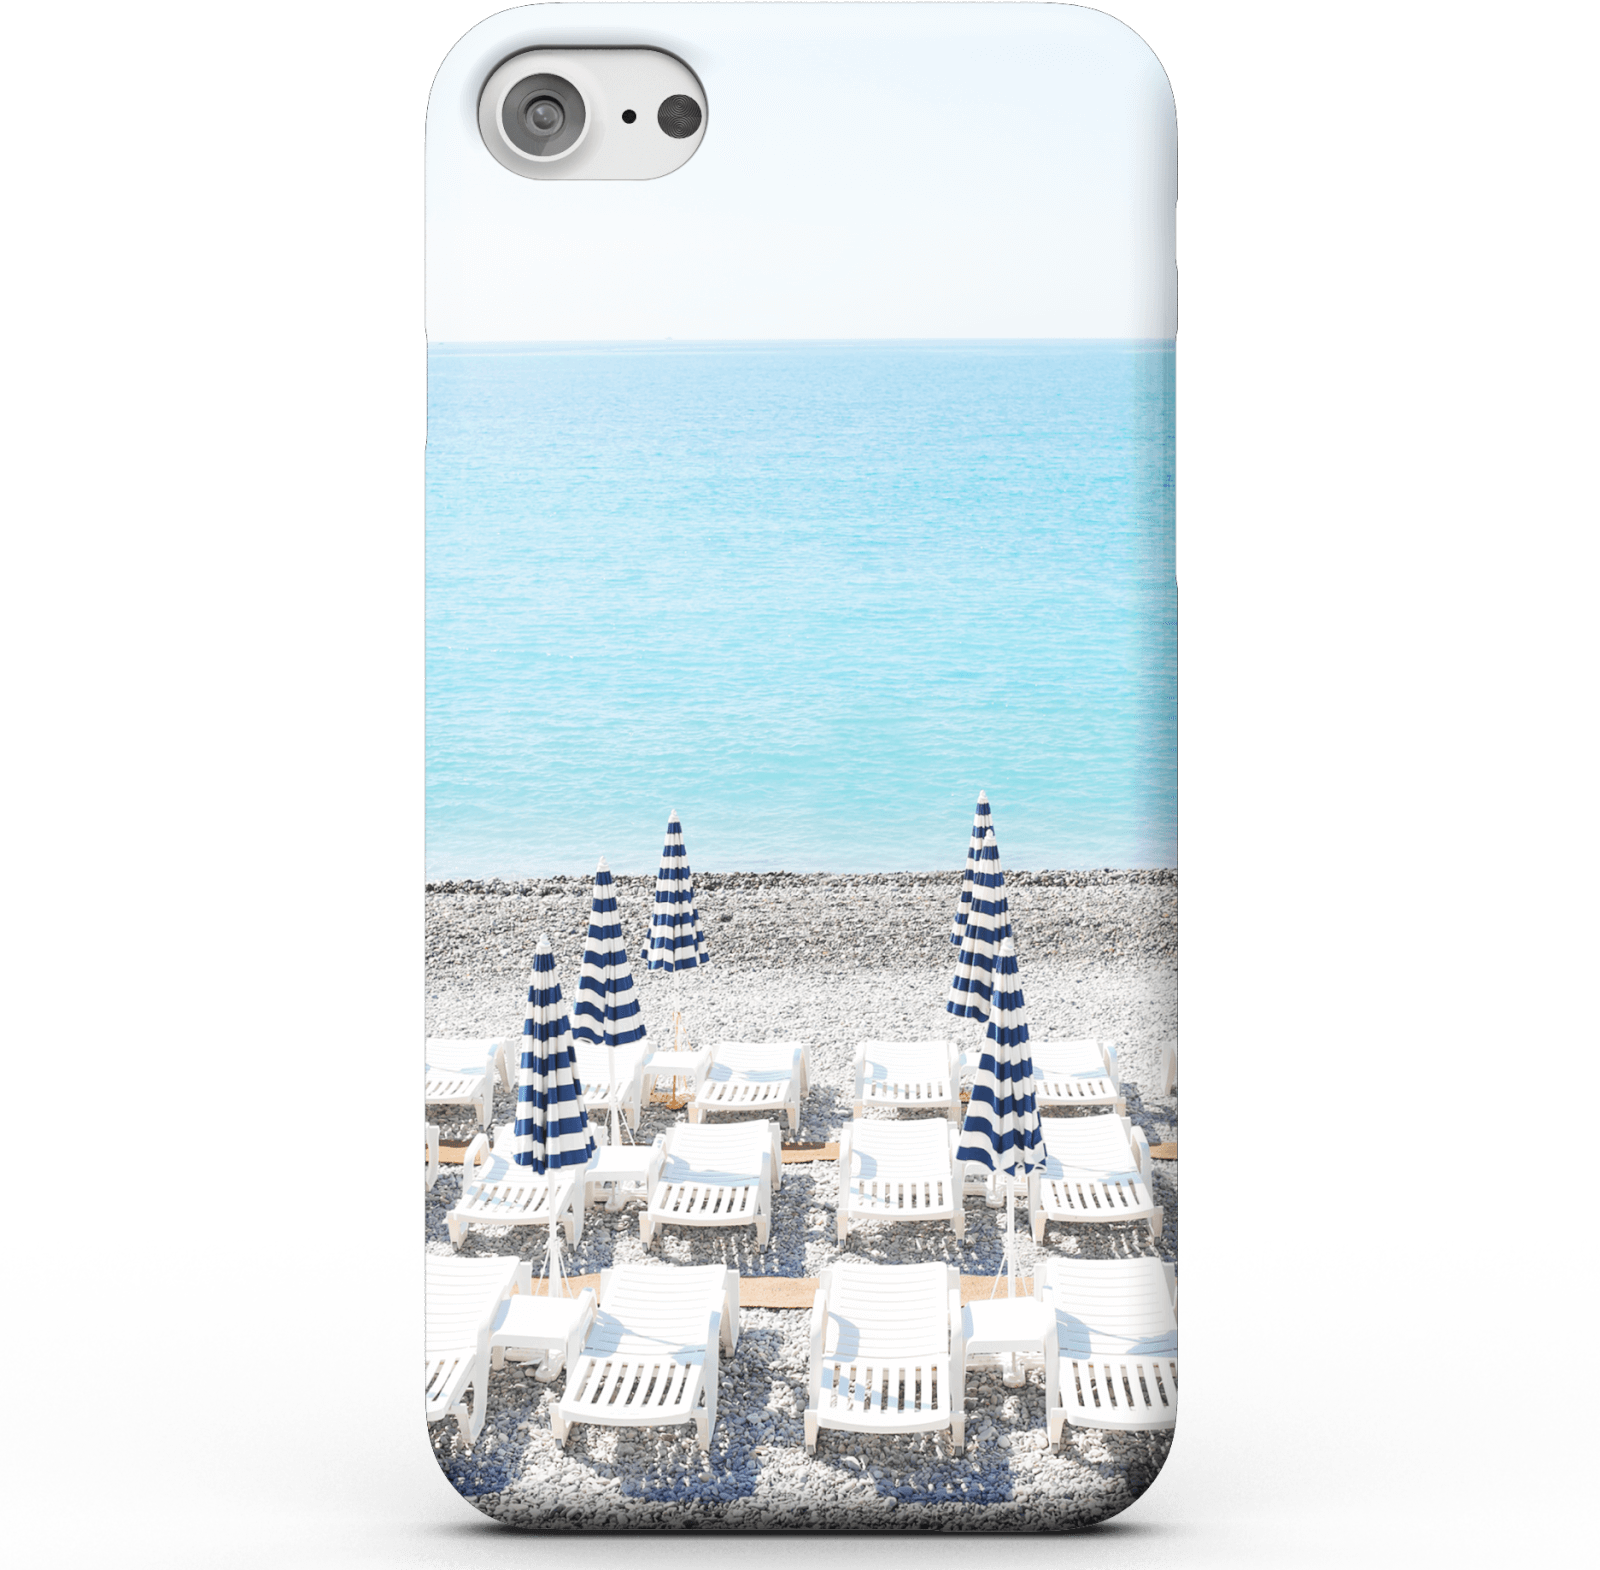 Down To The Beach Phone Case for iPhone and Android - iPhone 5/5s - Snap Case - Matte